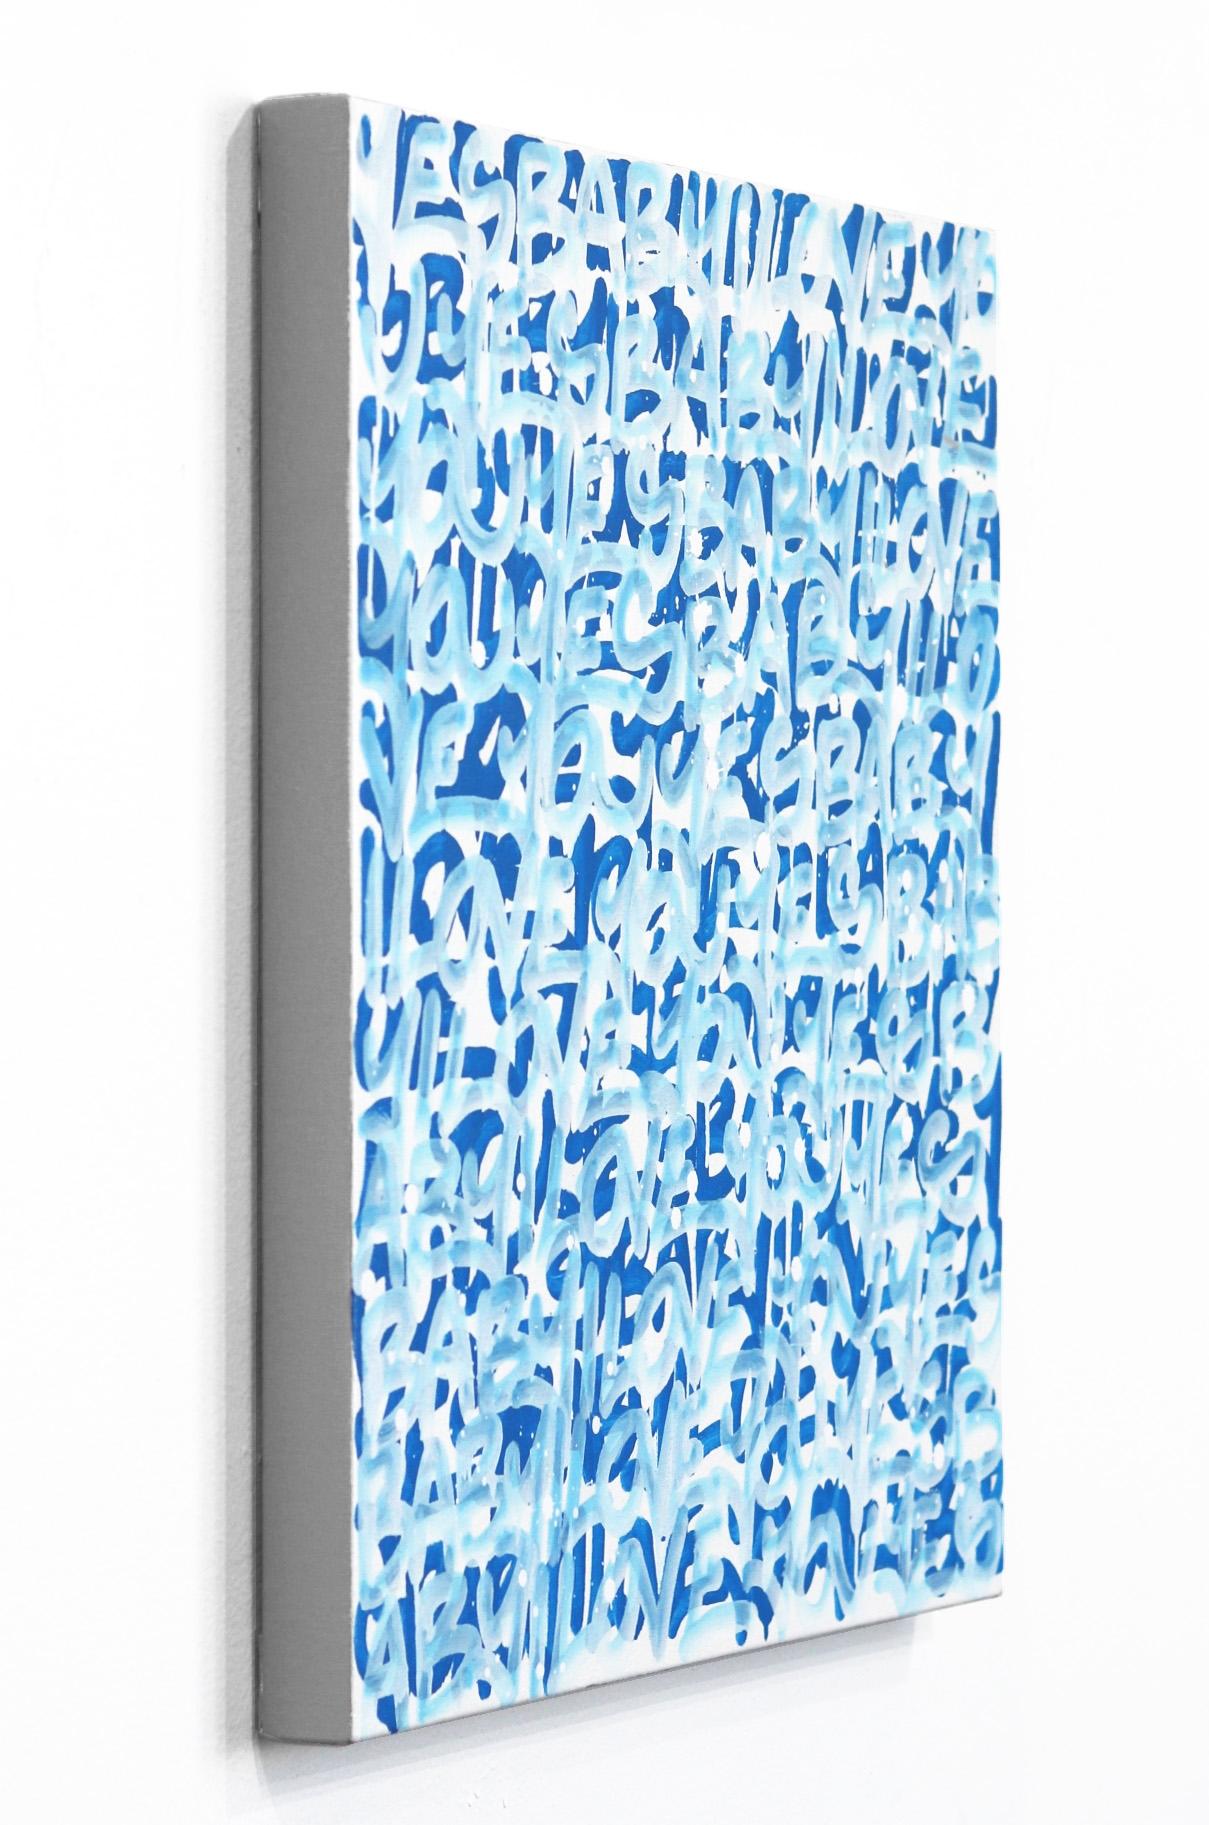 Life's Masterpiece - Blue Abstract Painting by Amber Goldhammer